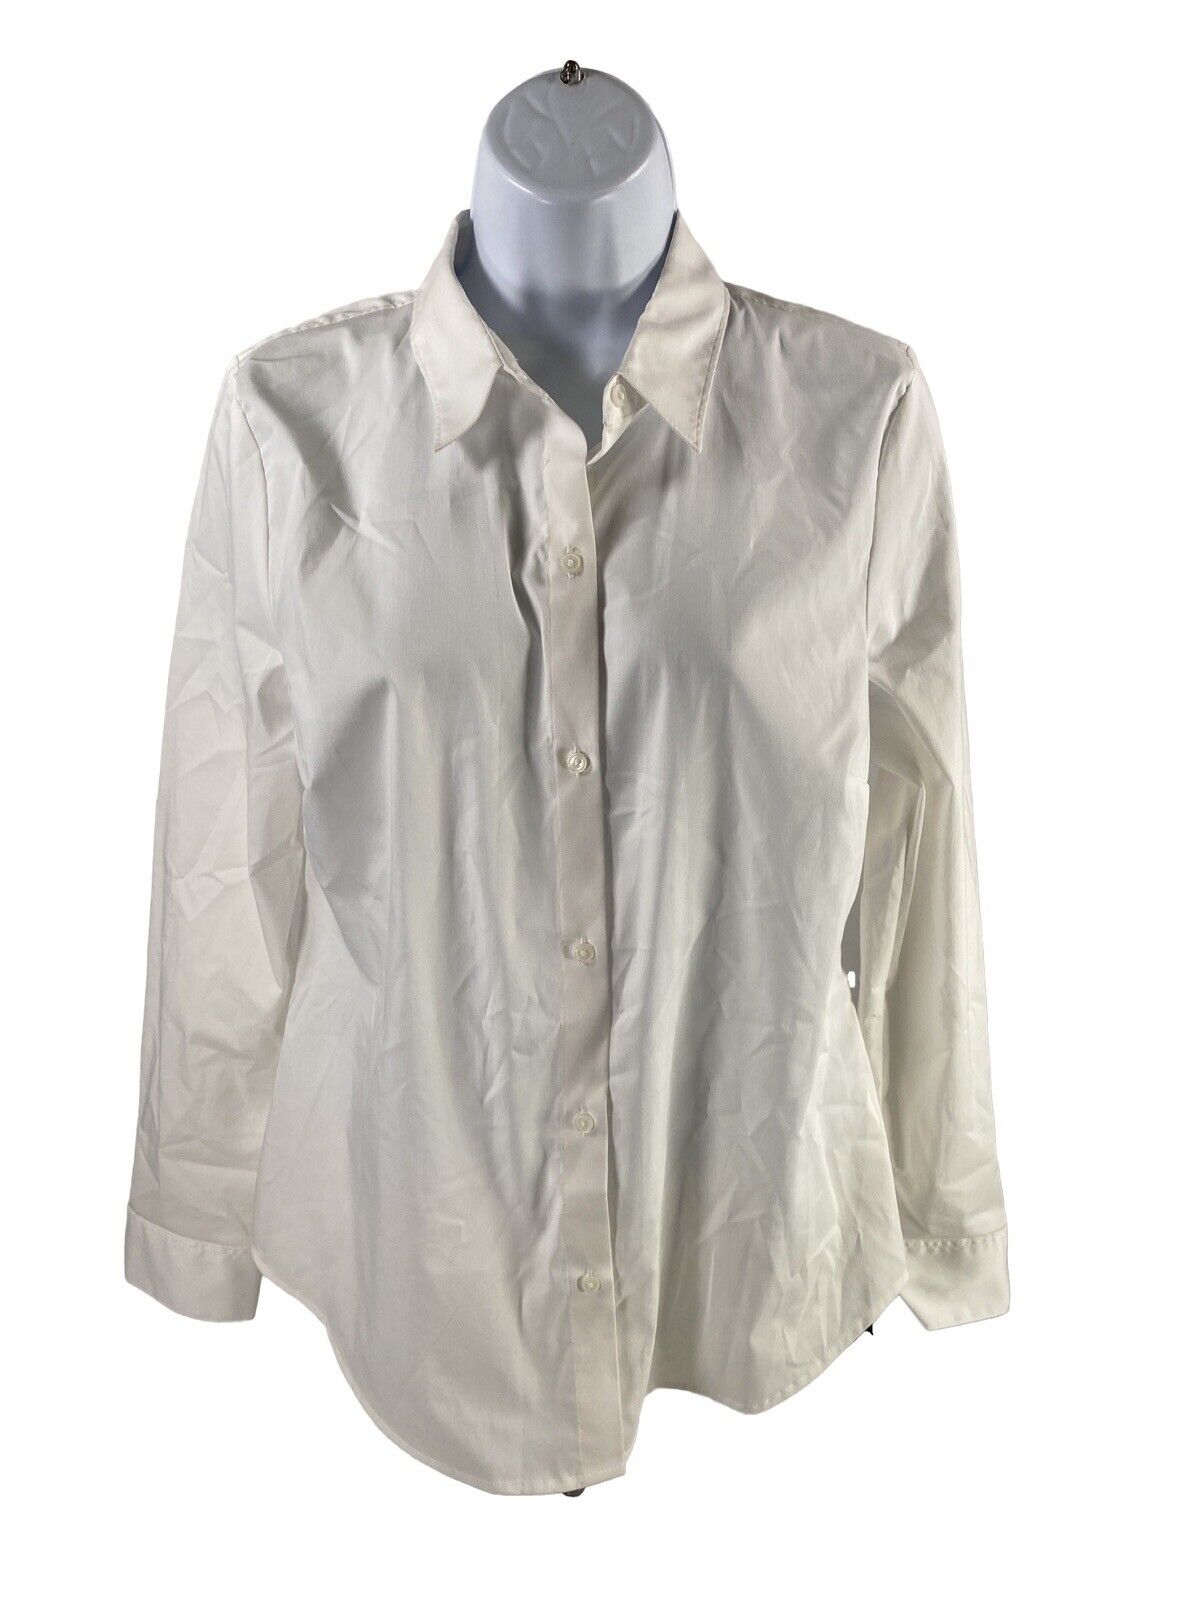 NEW Apt.9 Women's White Wrinkle Resistant Button Up Dress Shirt - 10